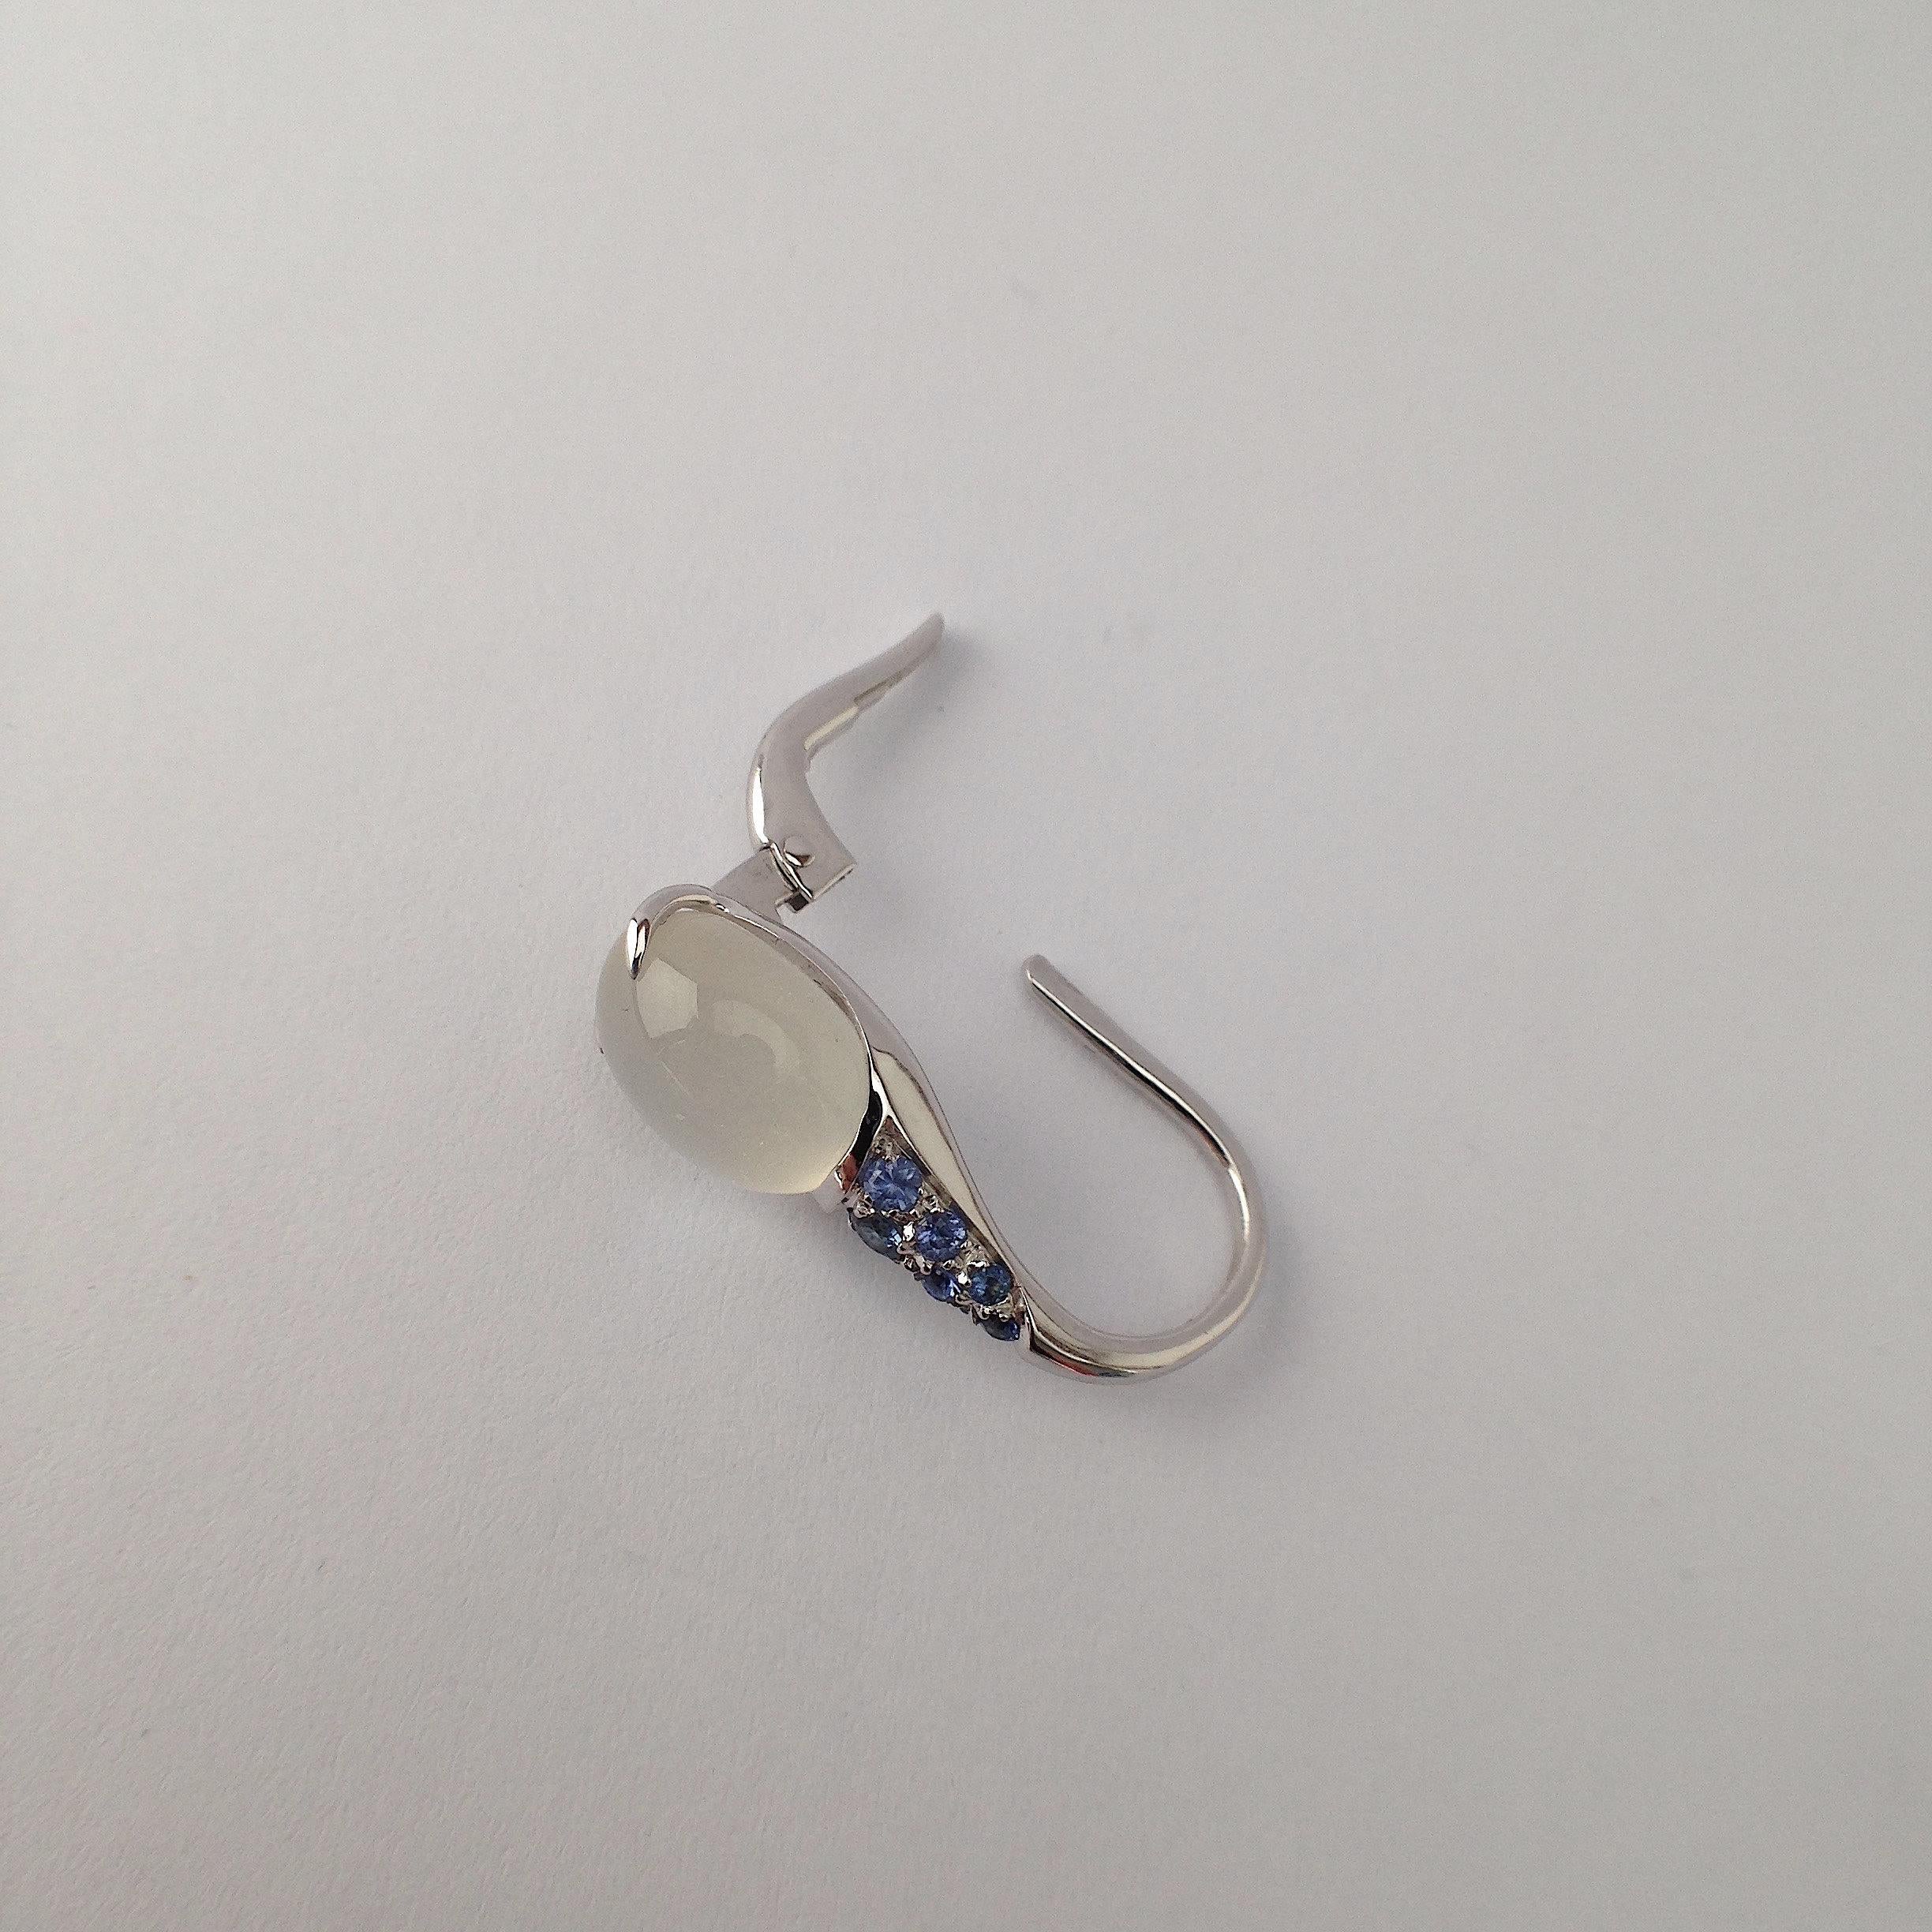 Gemstone Blue Sapphire Cabochon Moonstone 18 Kt White Gold Drop Hoop Earrings  In New Condition For Sale In Bussolengo, Verona